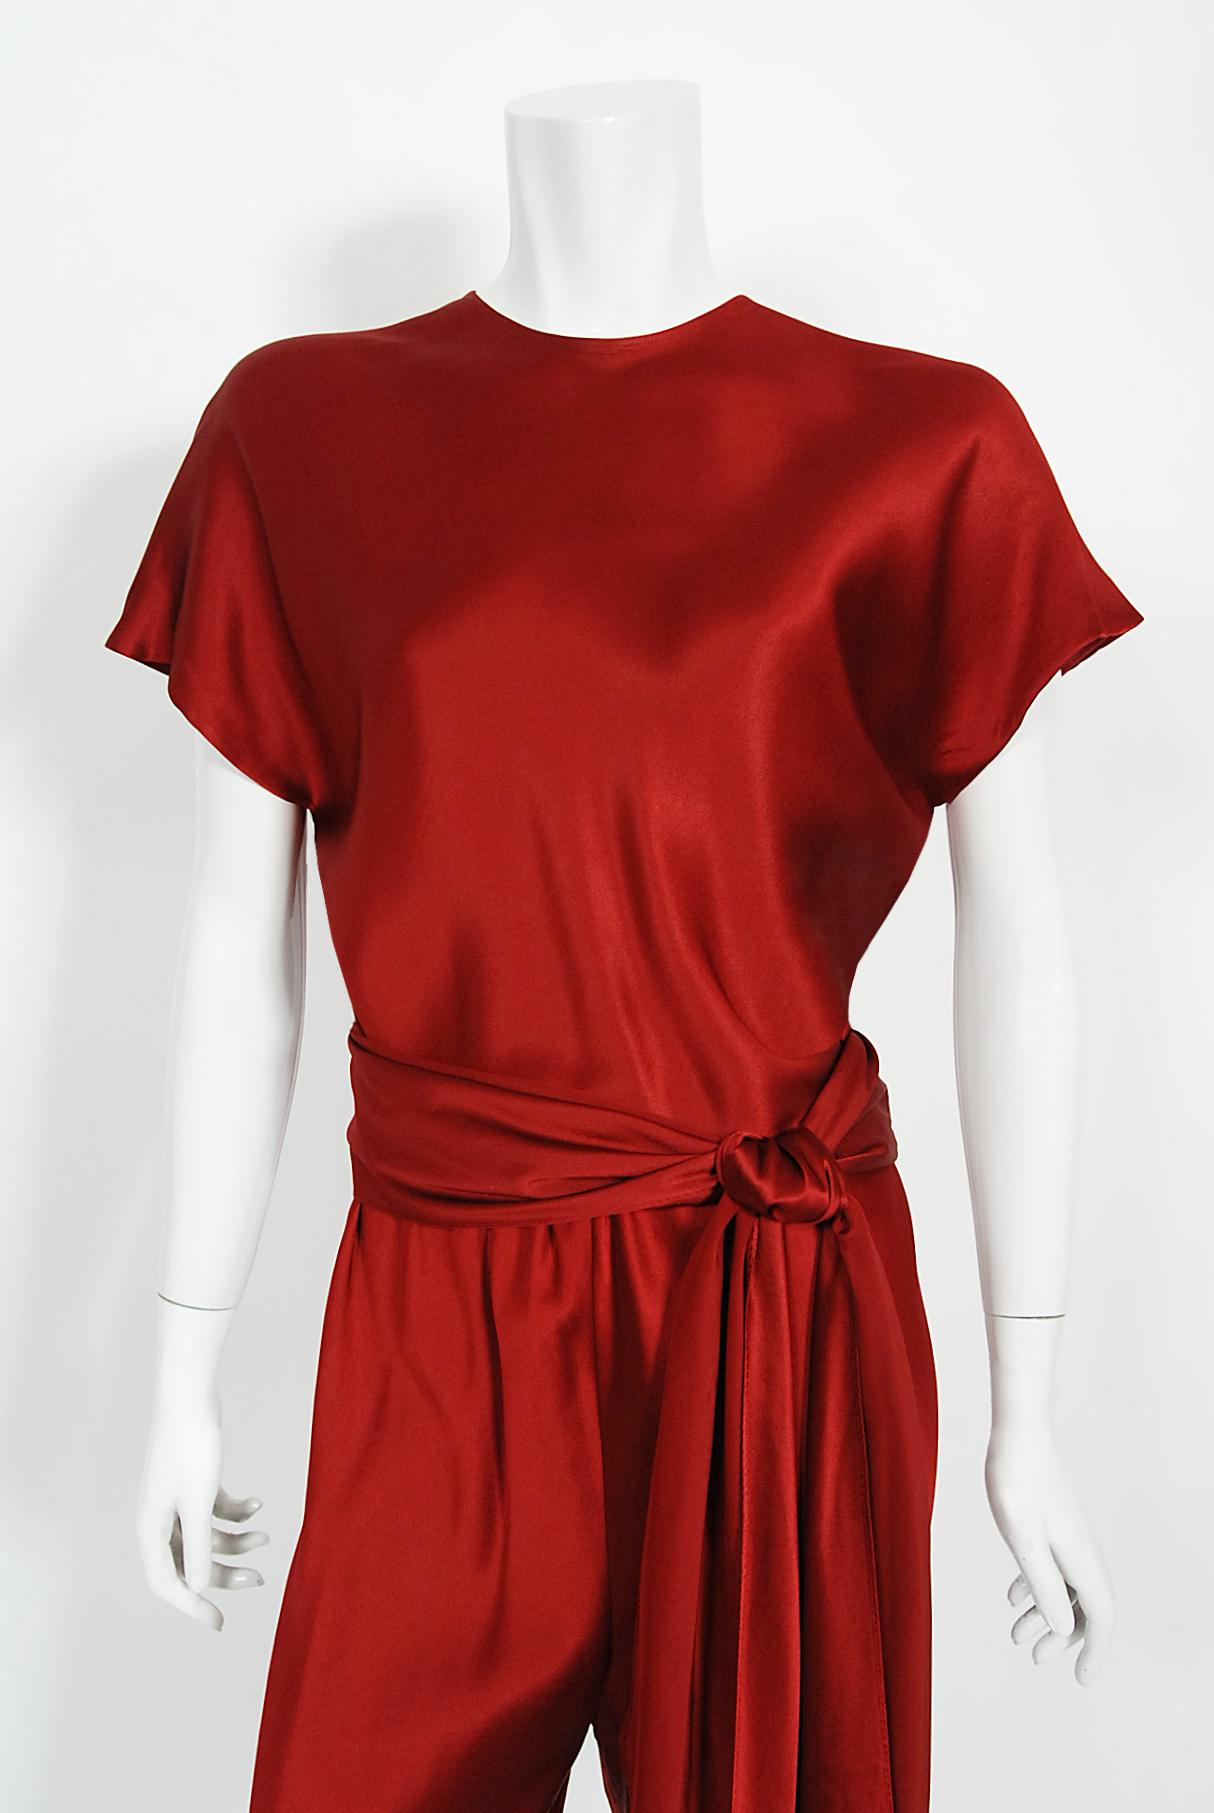 An absolutely gorgeous Halston couture wine red silk three-piece ensemble dating back to his fall-winter 1979 collection. As shown, the same set in mustard is archived at the Metropolitan Museum of Art in New York. Halston revolutionized the way